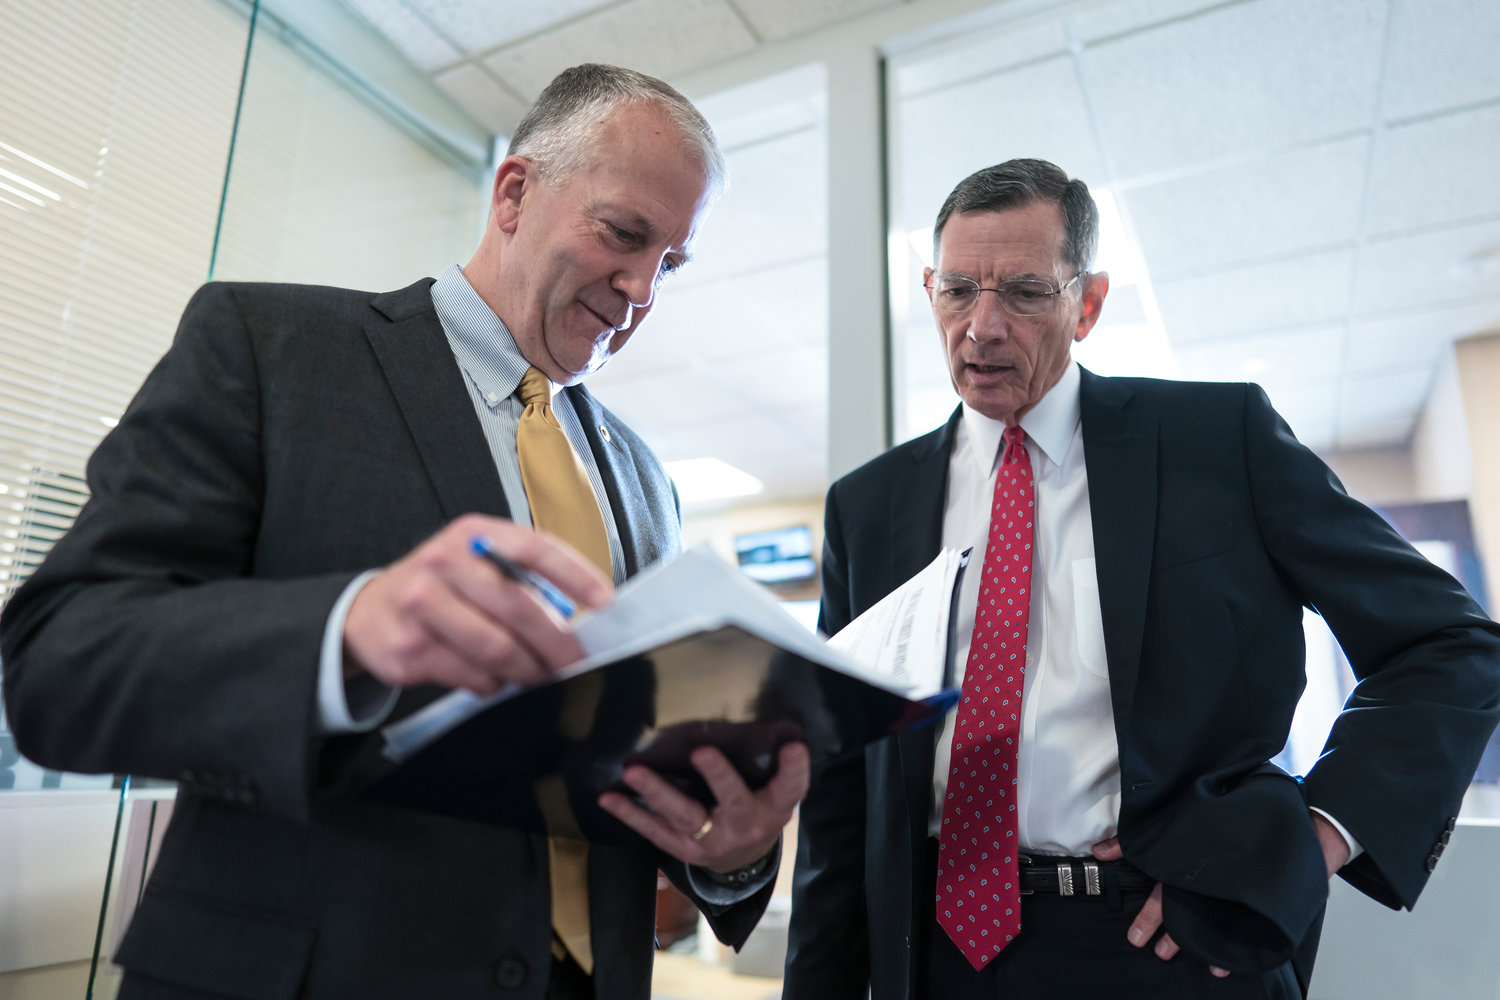 Sen. Dan Sullivan, R-Alaska, left, and Sen. John Barrasso, R-Wyo., confer just before a news conference to discuss their efforts to rescind recent Biden administration rules on the National Environmental Policy Act, at the Capitol in Washington, Tuesday, Aug. 2, 2022. (AP Photo/J. Scott Applewhite)